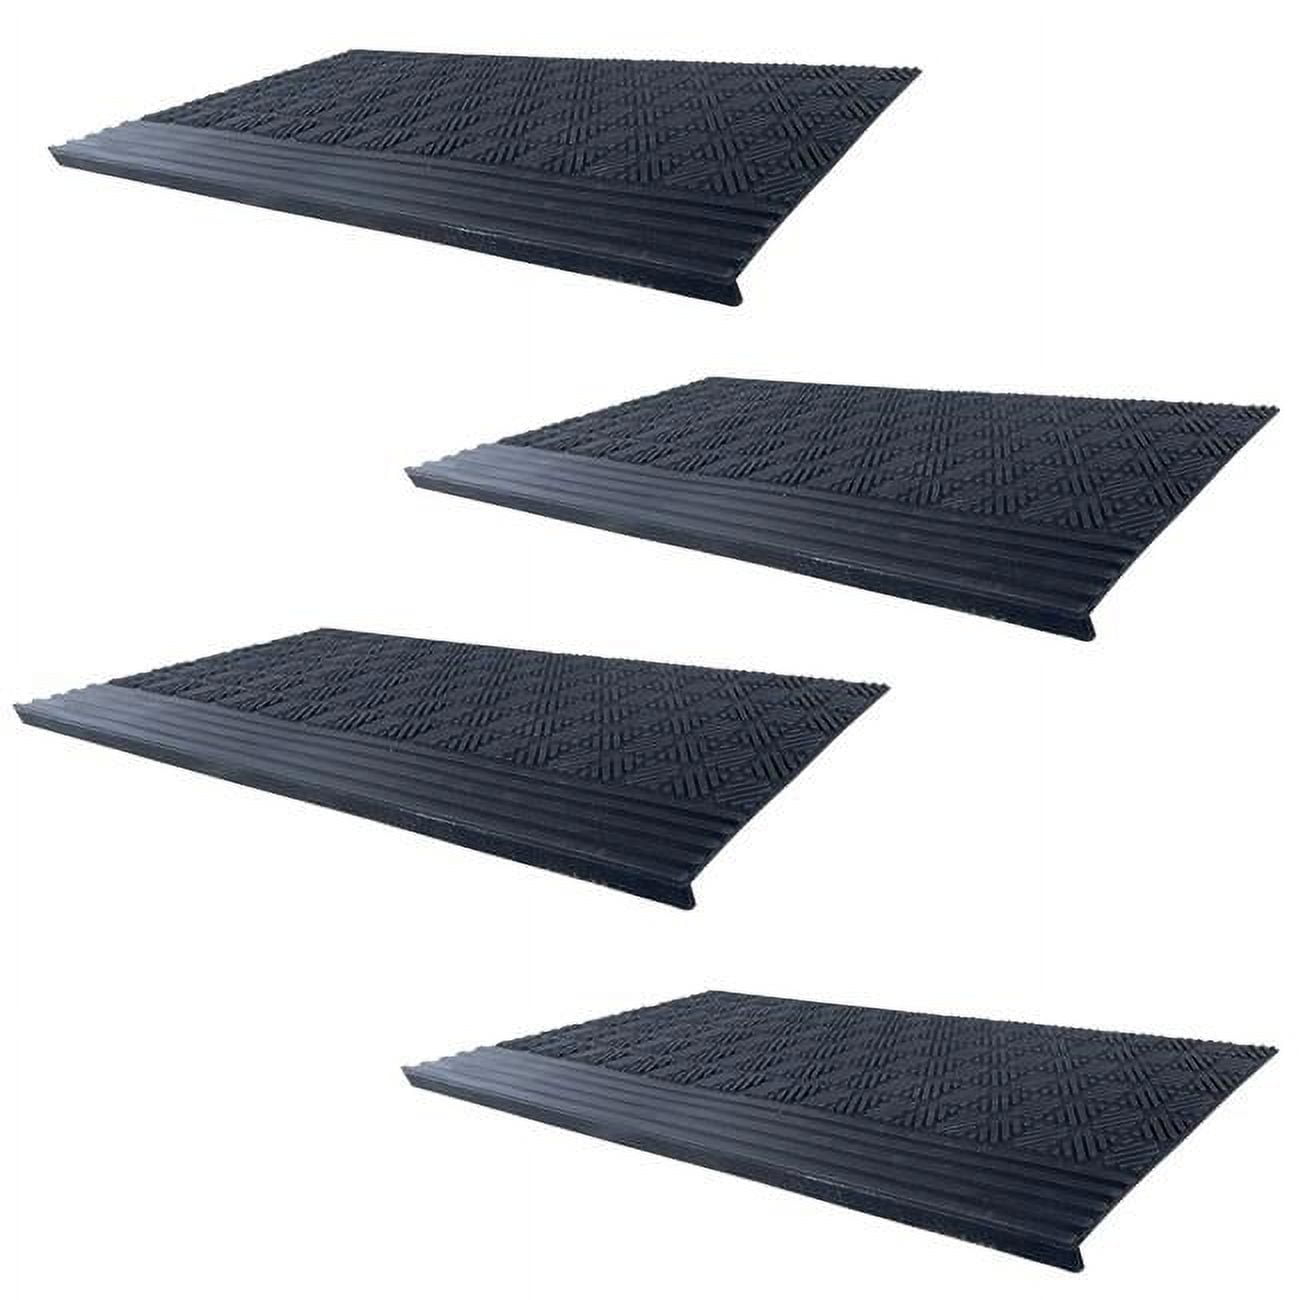 Picture of AmeriHome STMSQN10304 30 x 10 in. Bull Nose Rubber Stair Tread Set, 4 Piece